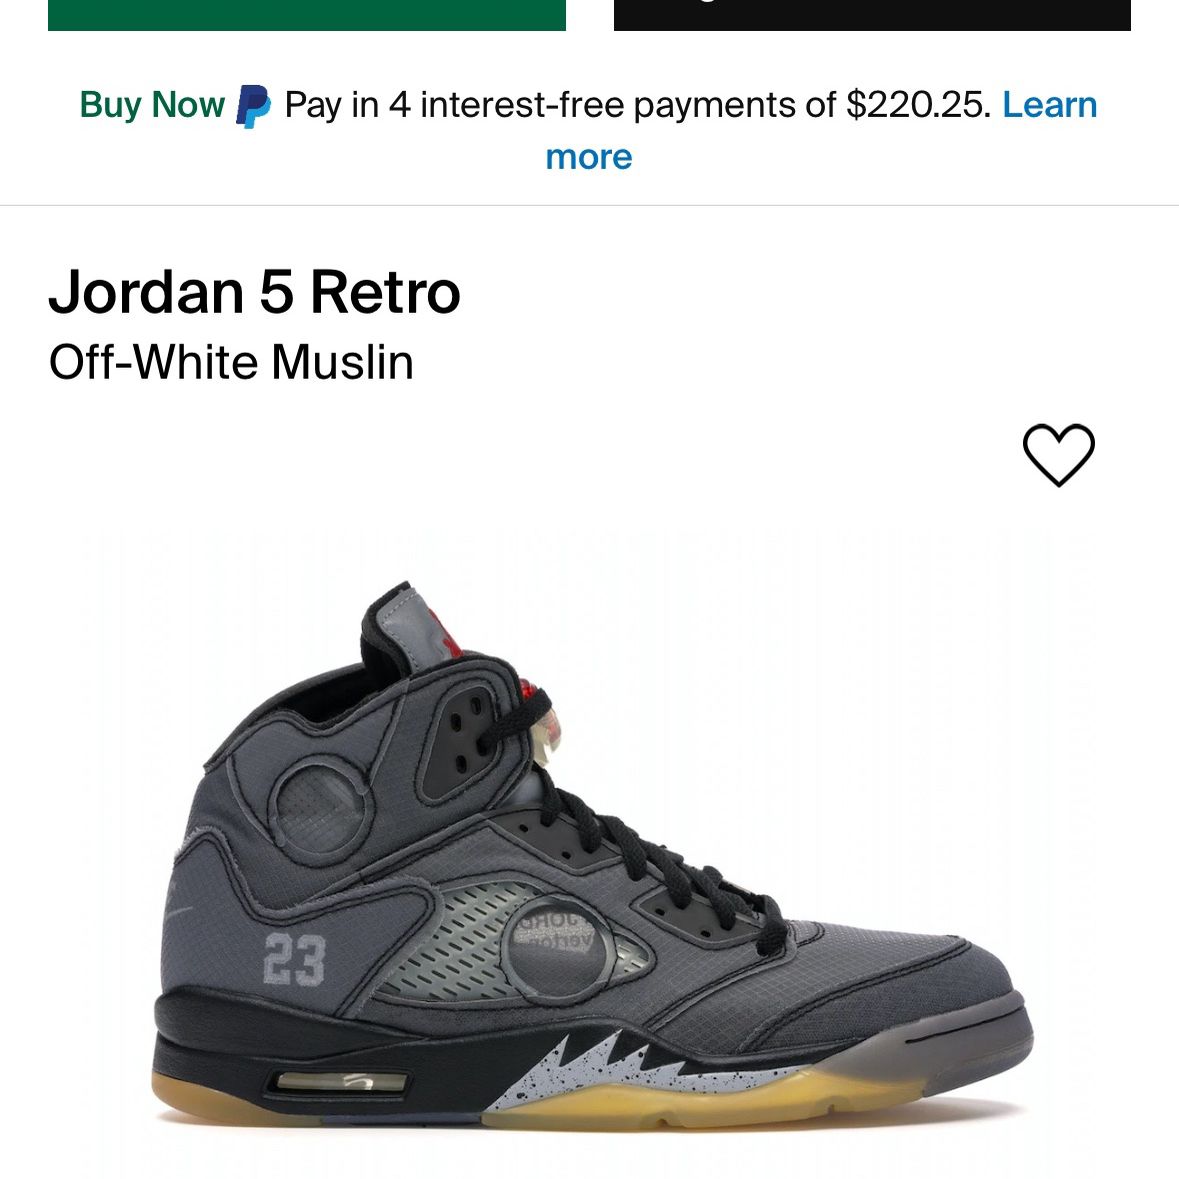 OFF WHITE NIKE AIR JORDAN 5 RETRO MUSLIN RED BLACK SAIL WHITE NEW SALE  SNEAKERS SHOES BOX MEN SIZE 11 45 A3 for Sale in Miami, FL - OfferUp